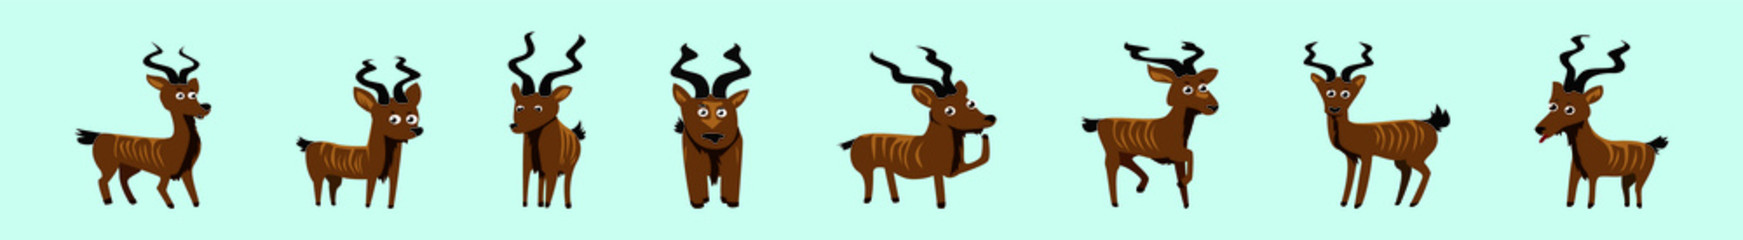 a set of deer icon design template with various models. vector illustration